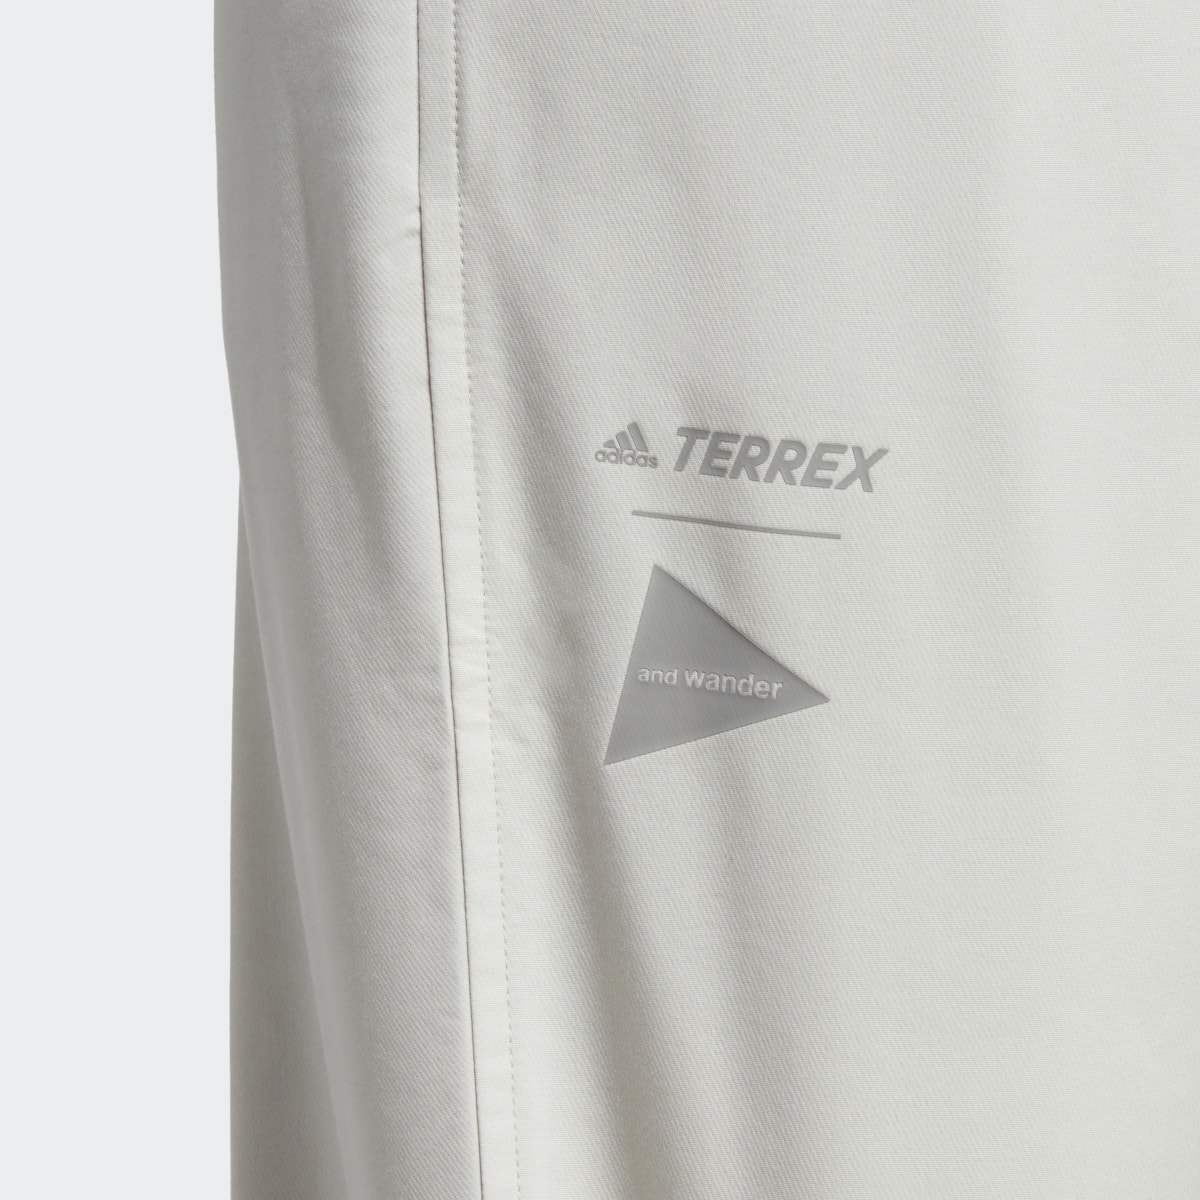 Adidas Terrex x and wander Trousers. 9